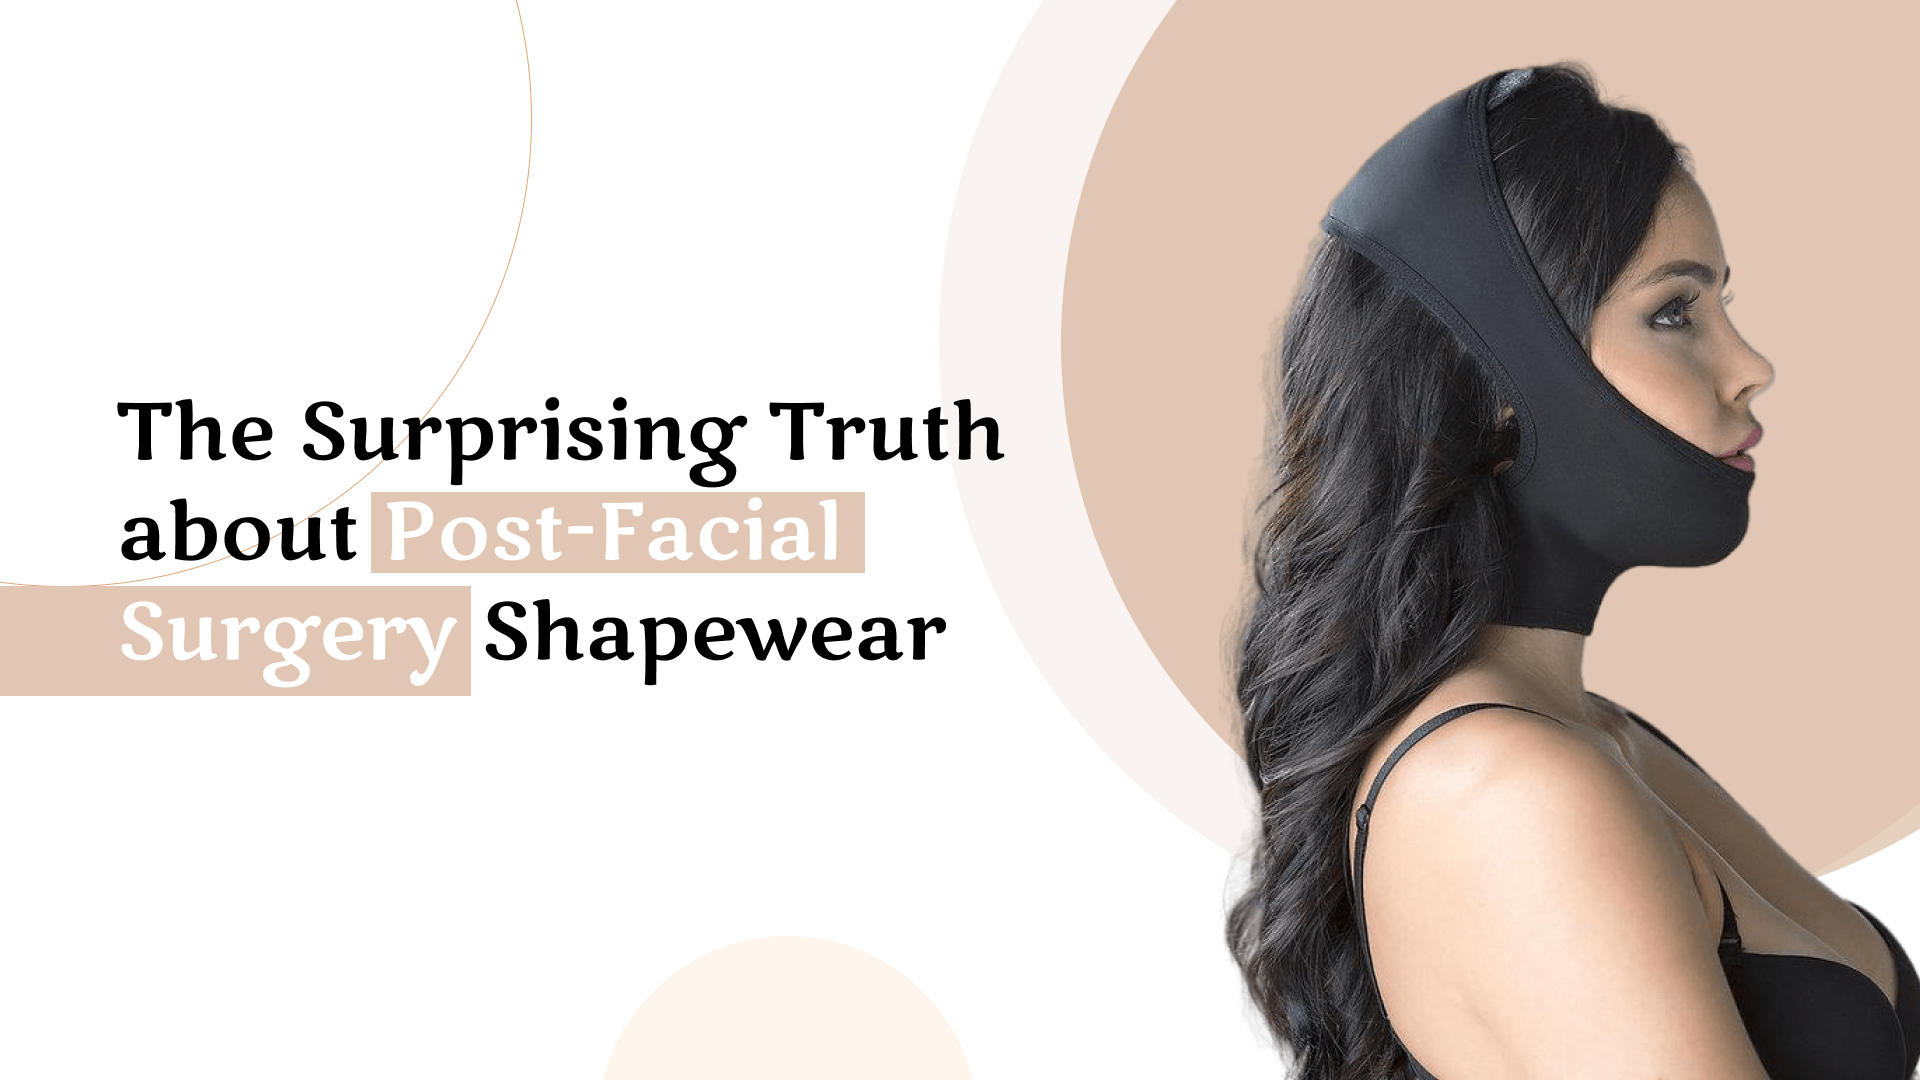 The Surprising Truth about Post-Facial Surgery Shapewear